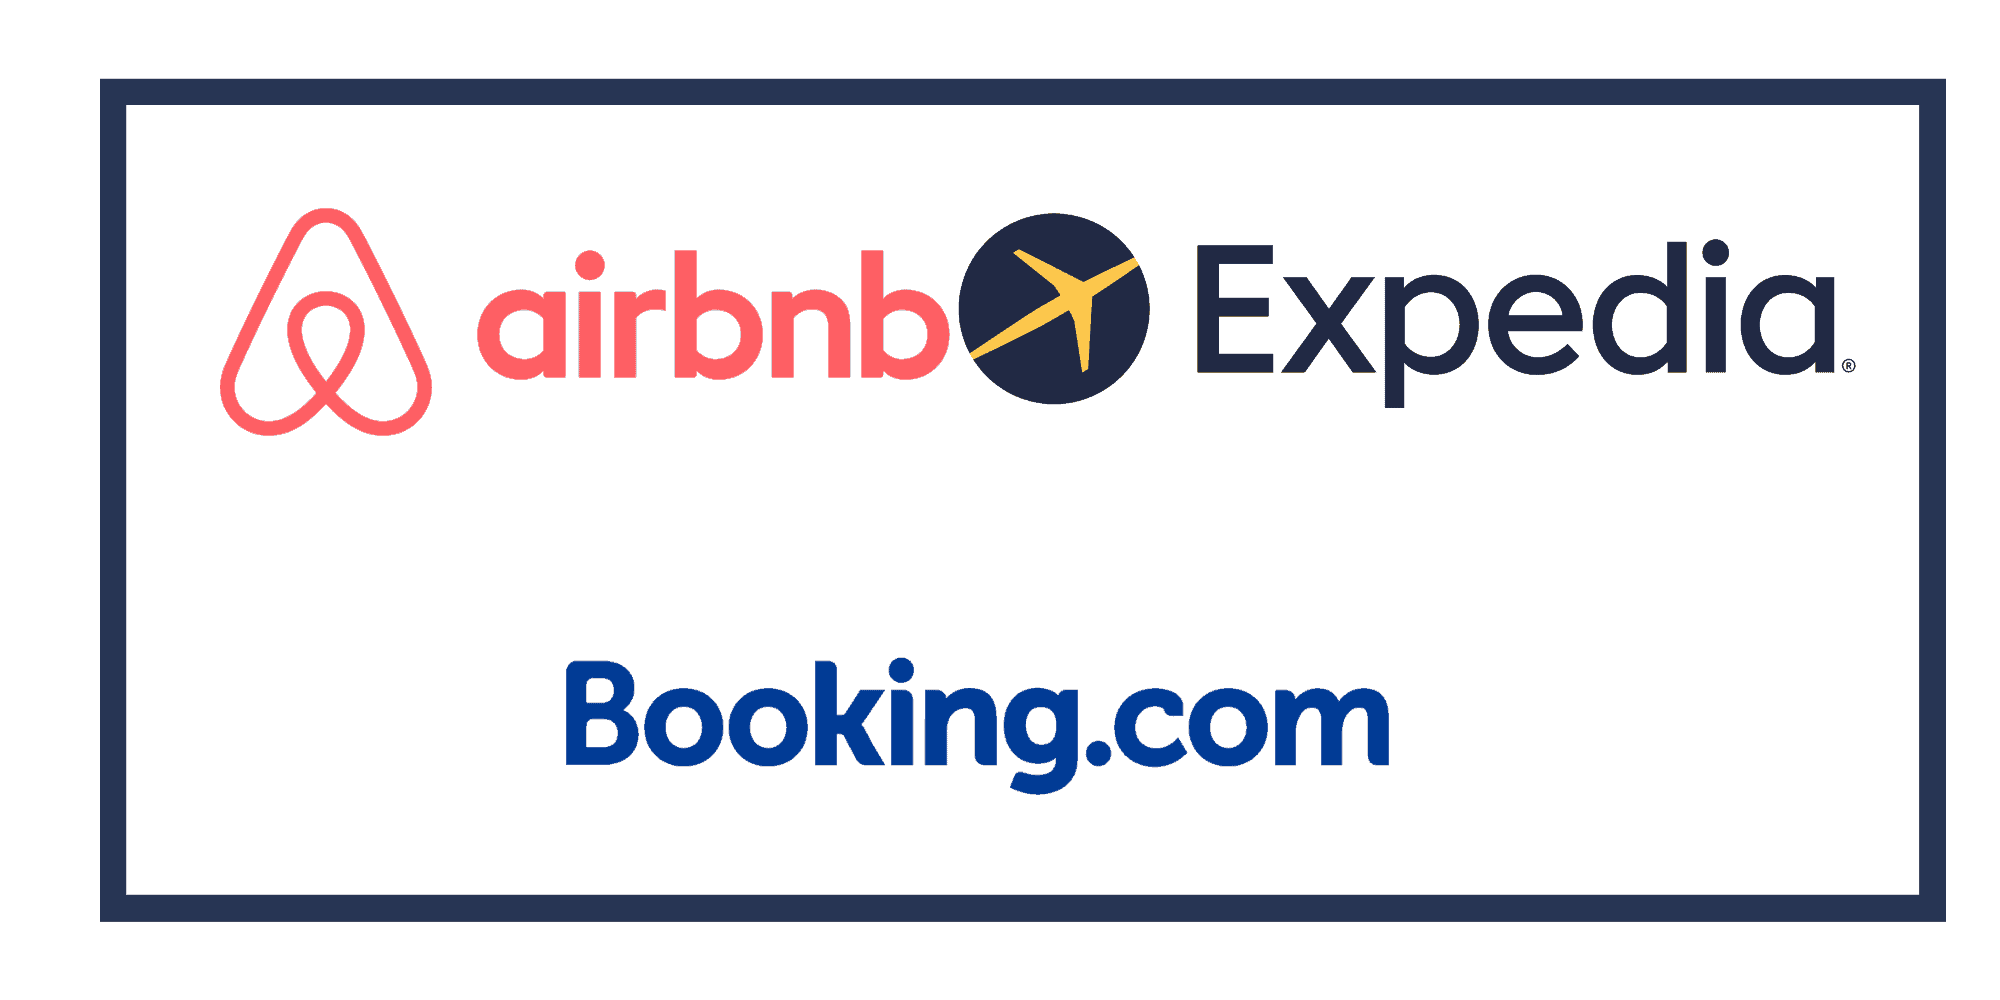 8 Top Online Travel Booking Websites Compared.